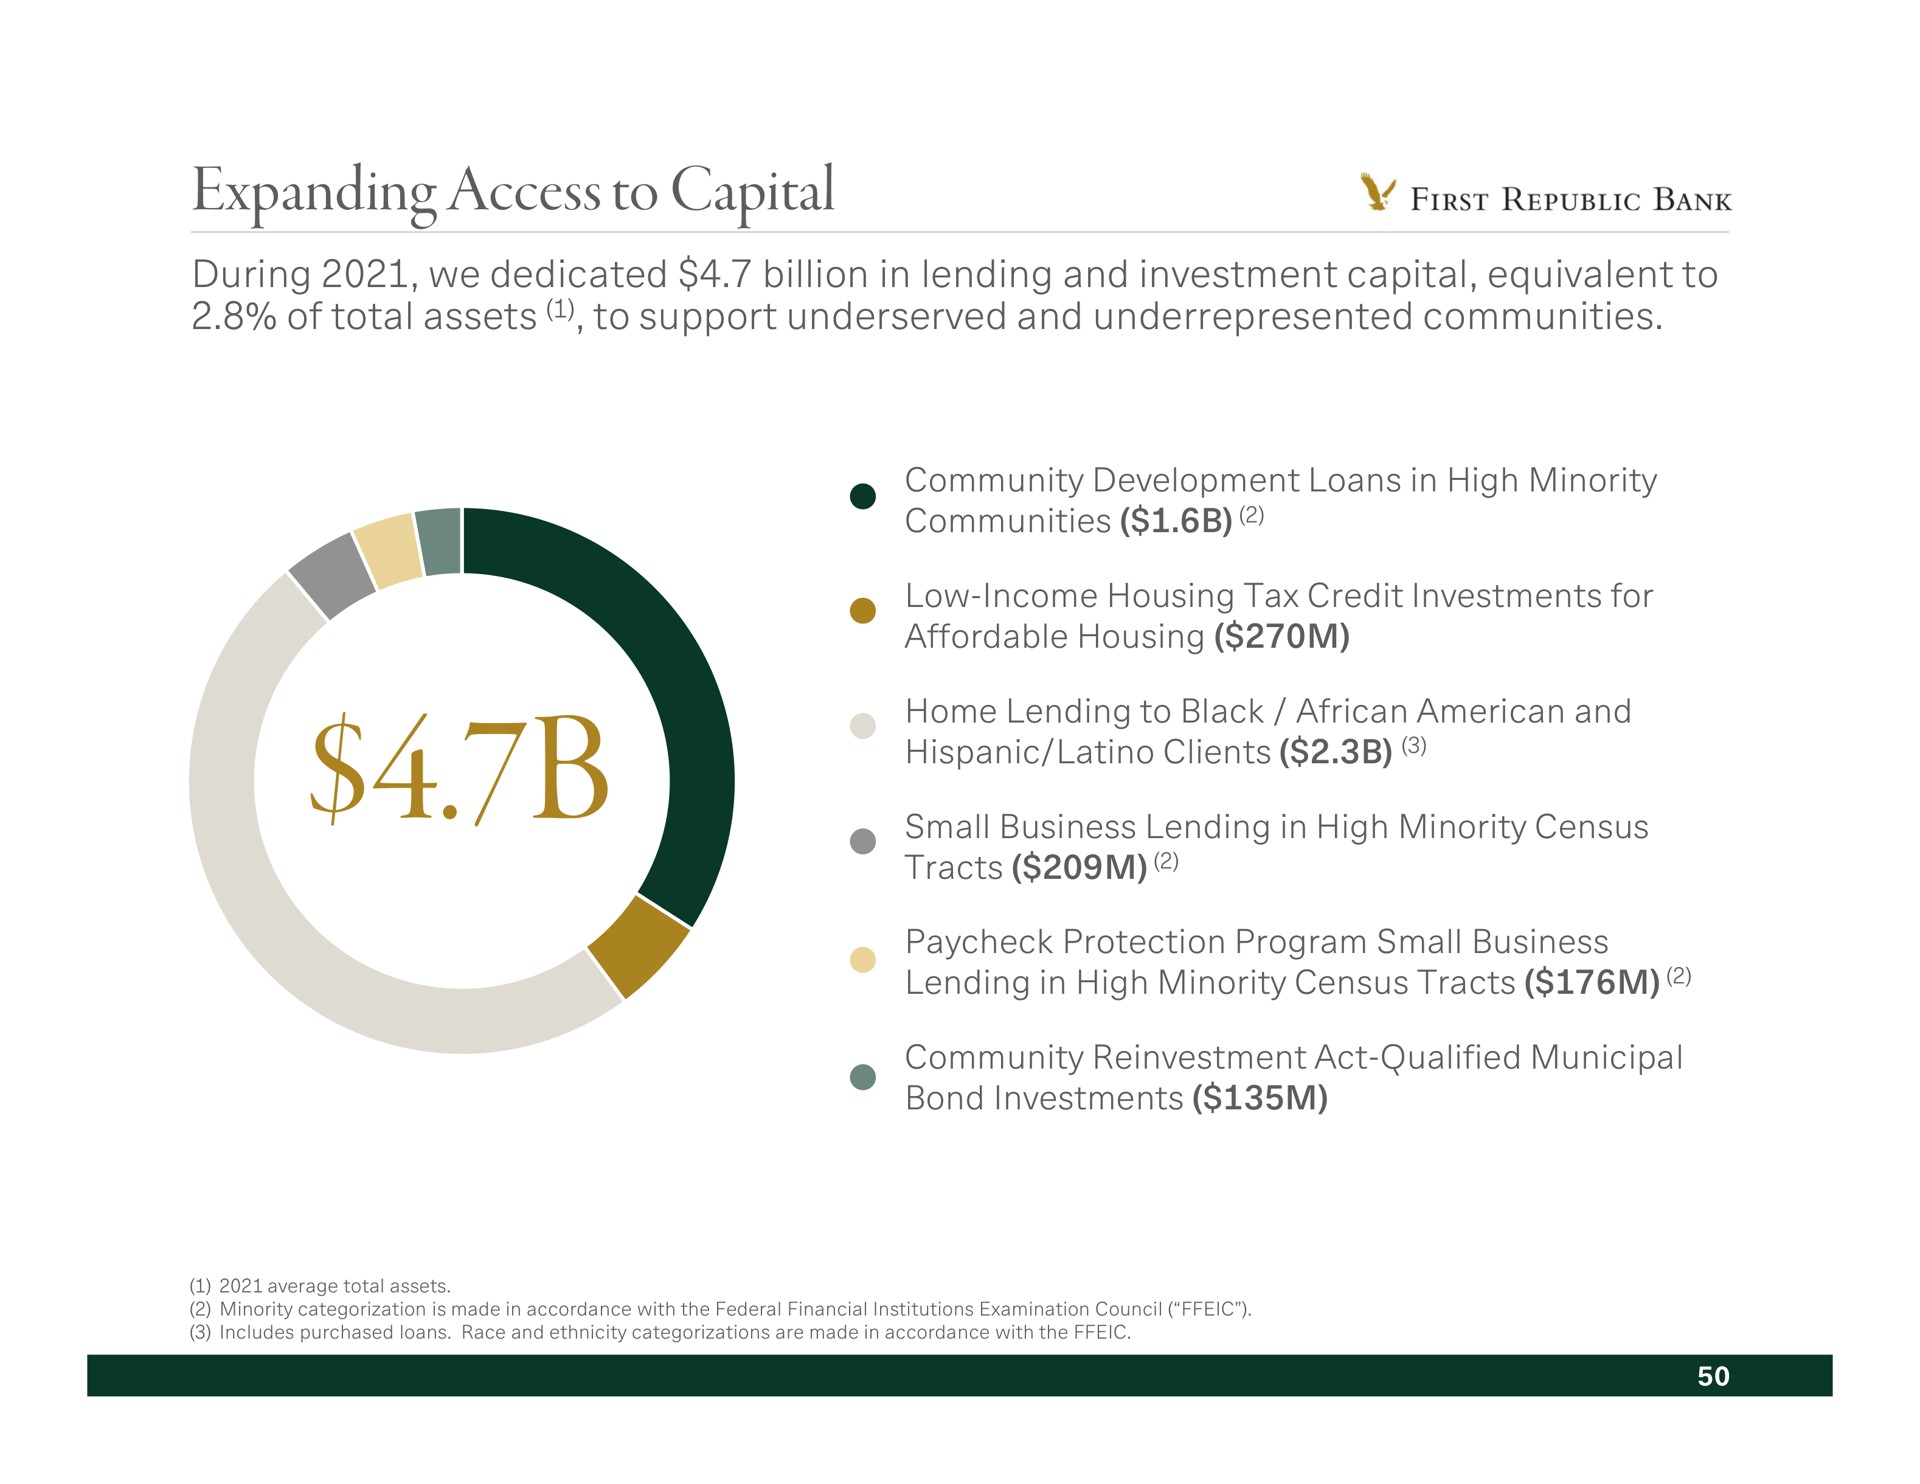 expanding access to capital during we dedicated billion in lending and investment equivalent of total assets support and communities communities lending in high minority census tracts | First Republic Bank